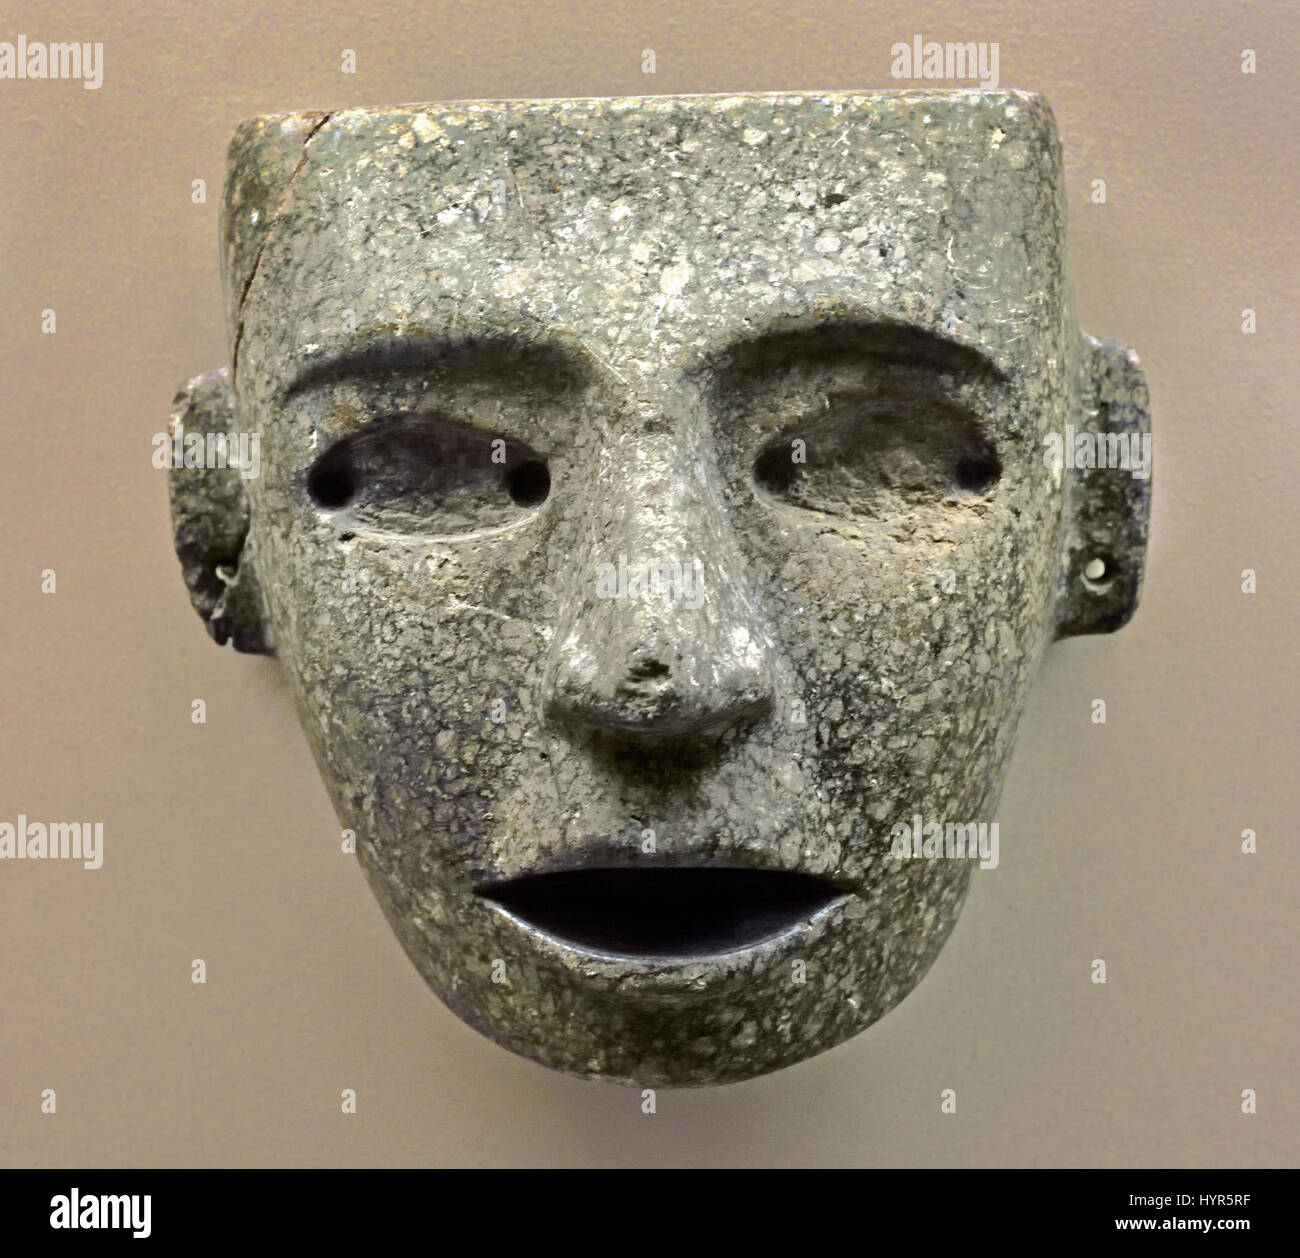 Mask made of marble. Teotihuacan  150 BC - AD 750 Mexico   ( The Mayans - Maya civilization was a Mesoamerican civilization in Yucatán  Mexico and Belize in Central America ( 2600 BC - 1500 AD ) Pre Columbian American ) Stock Photo